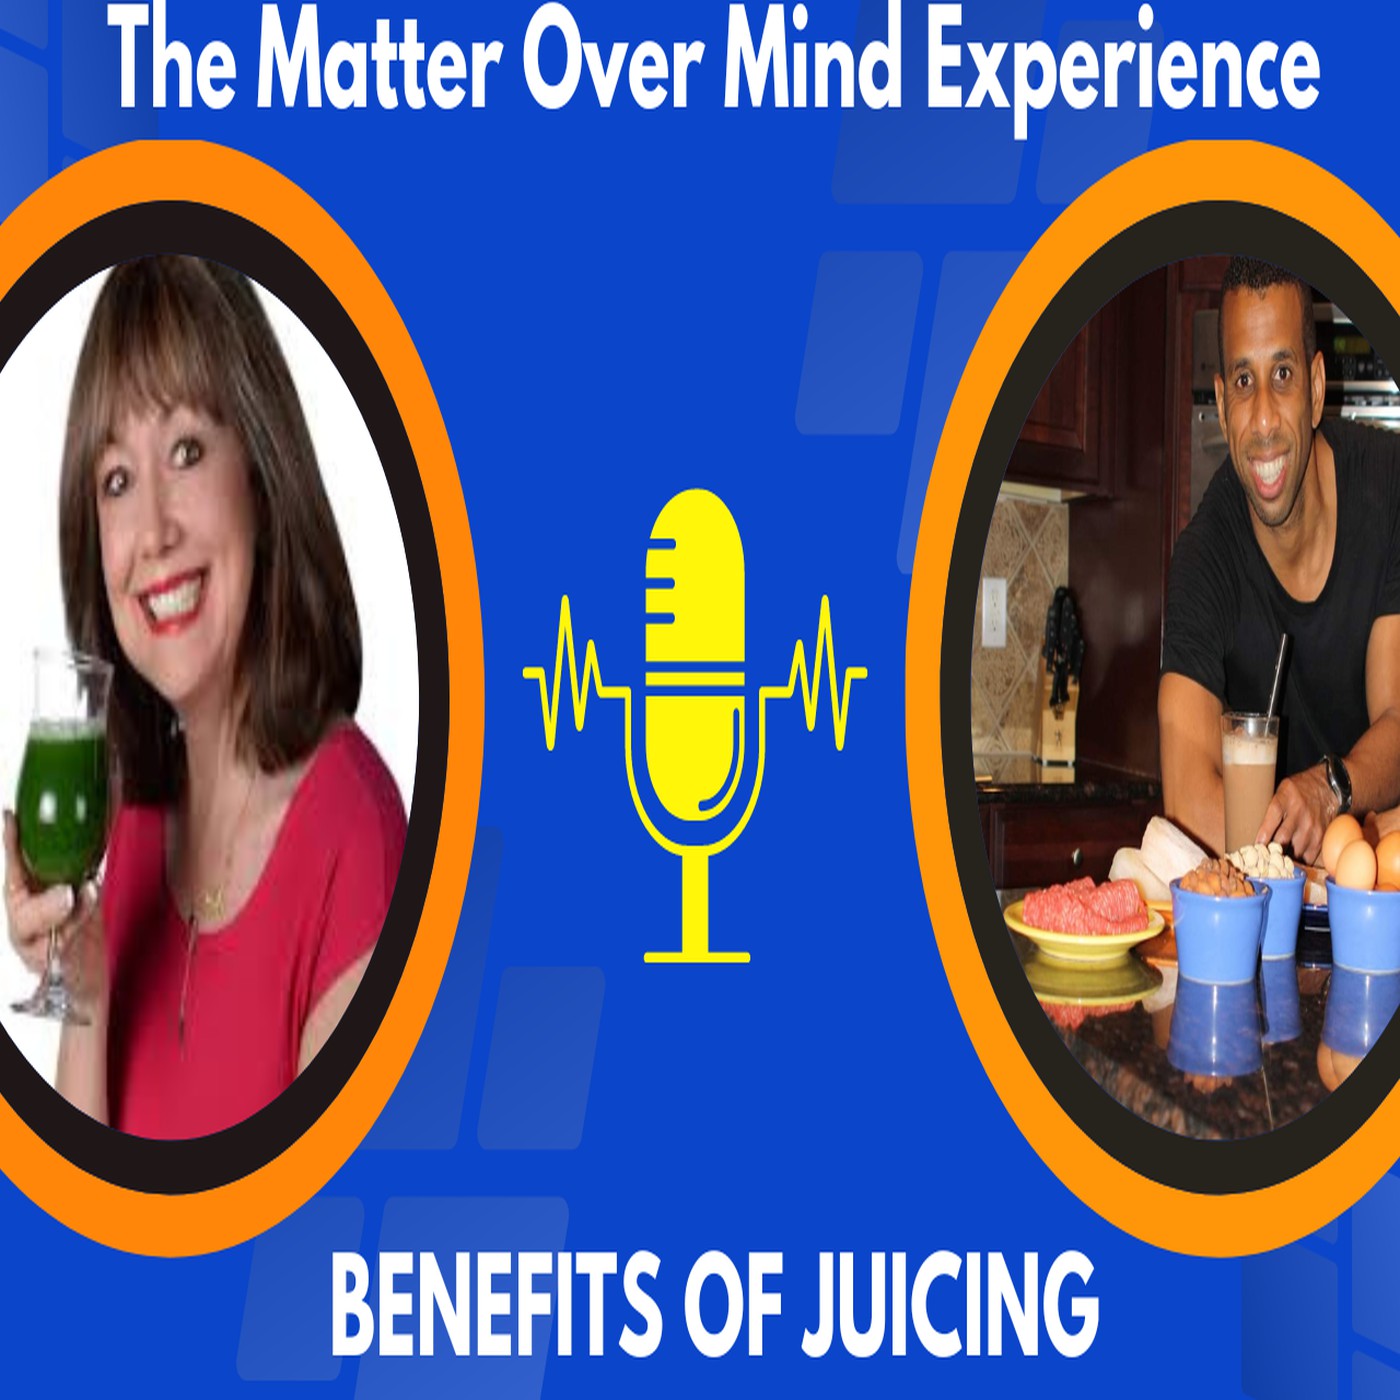 The Matter Over Mind Experience